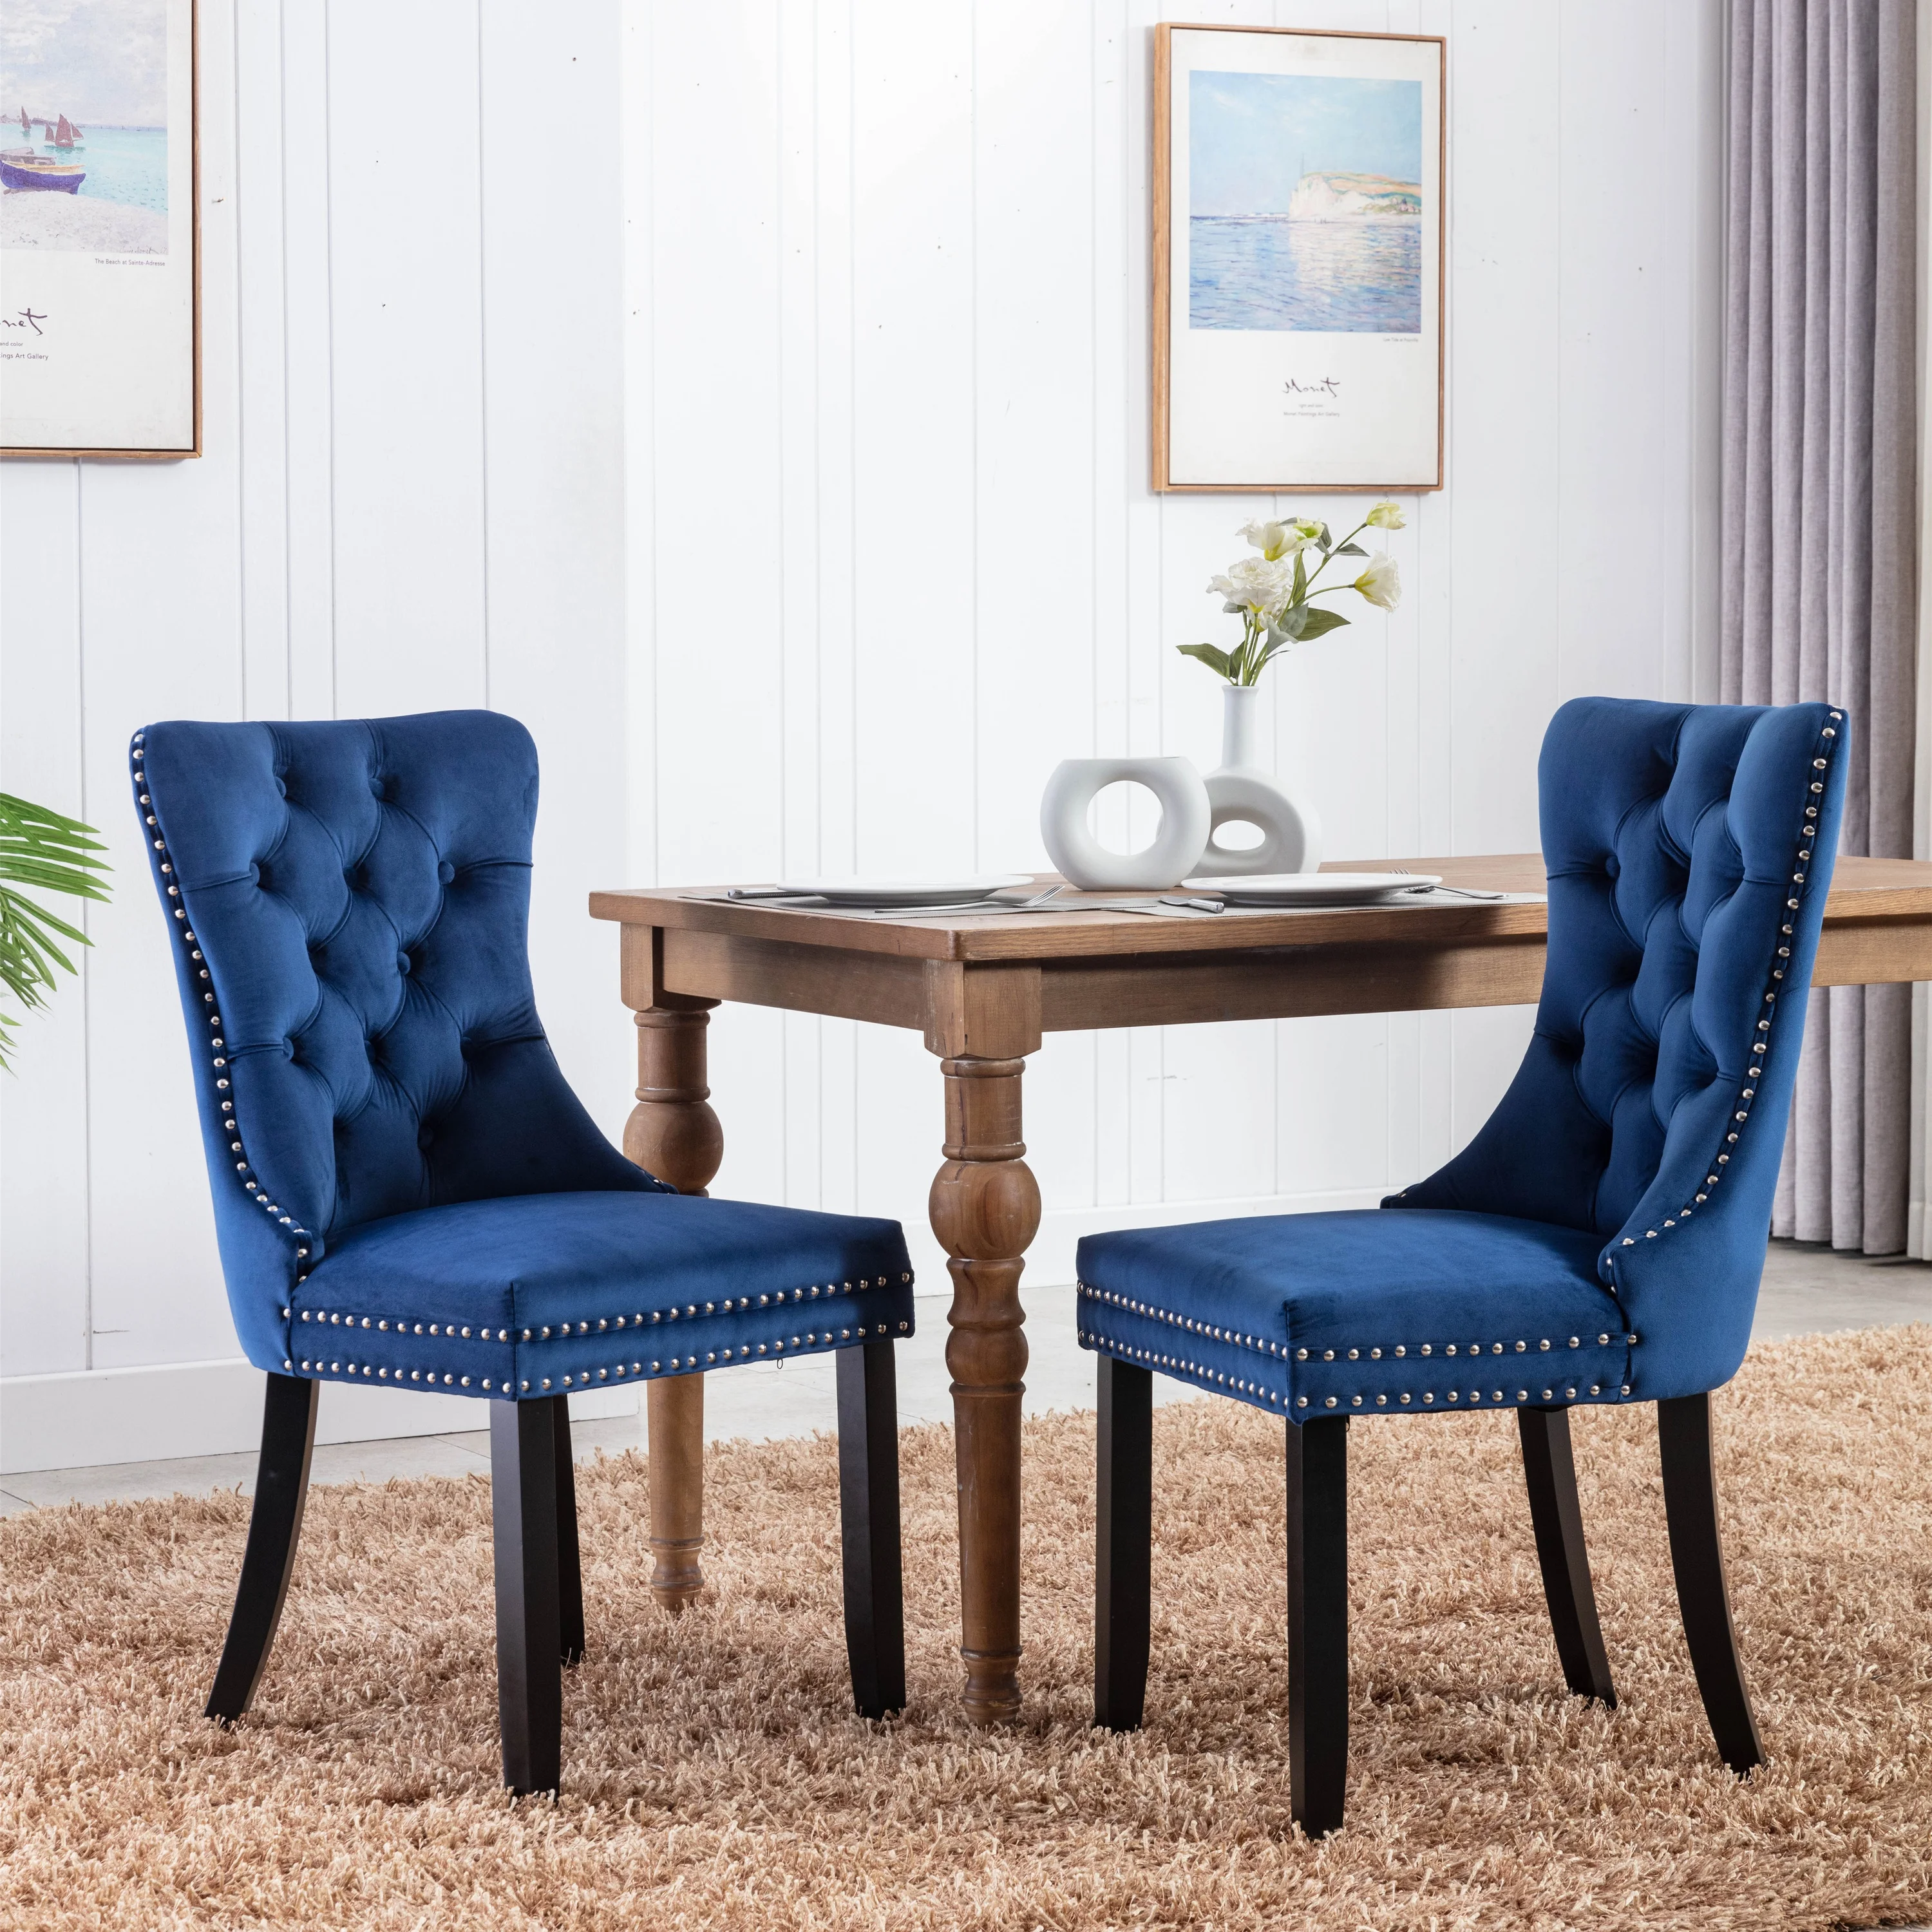 

2Pcs Furniture Modern High-end Tufted Solid Wood Contemporary Velvet Upholstered Dining Chair with Wood Legs Nailhead Trim Blue